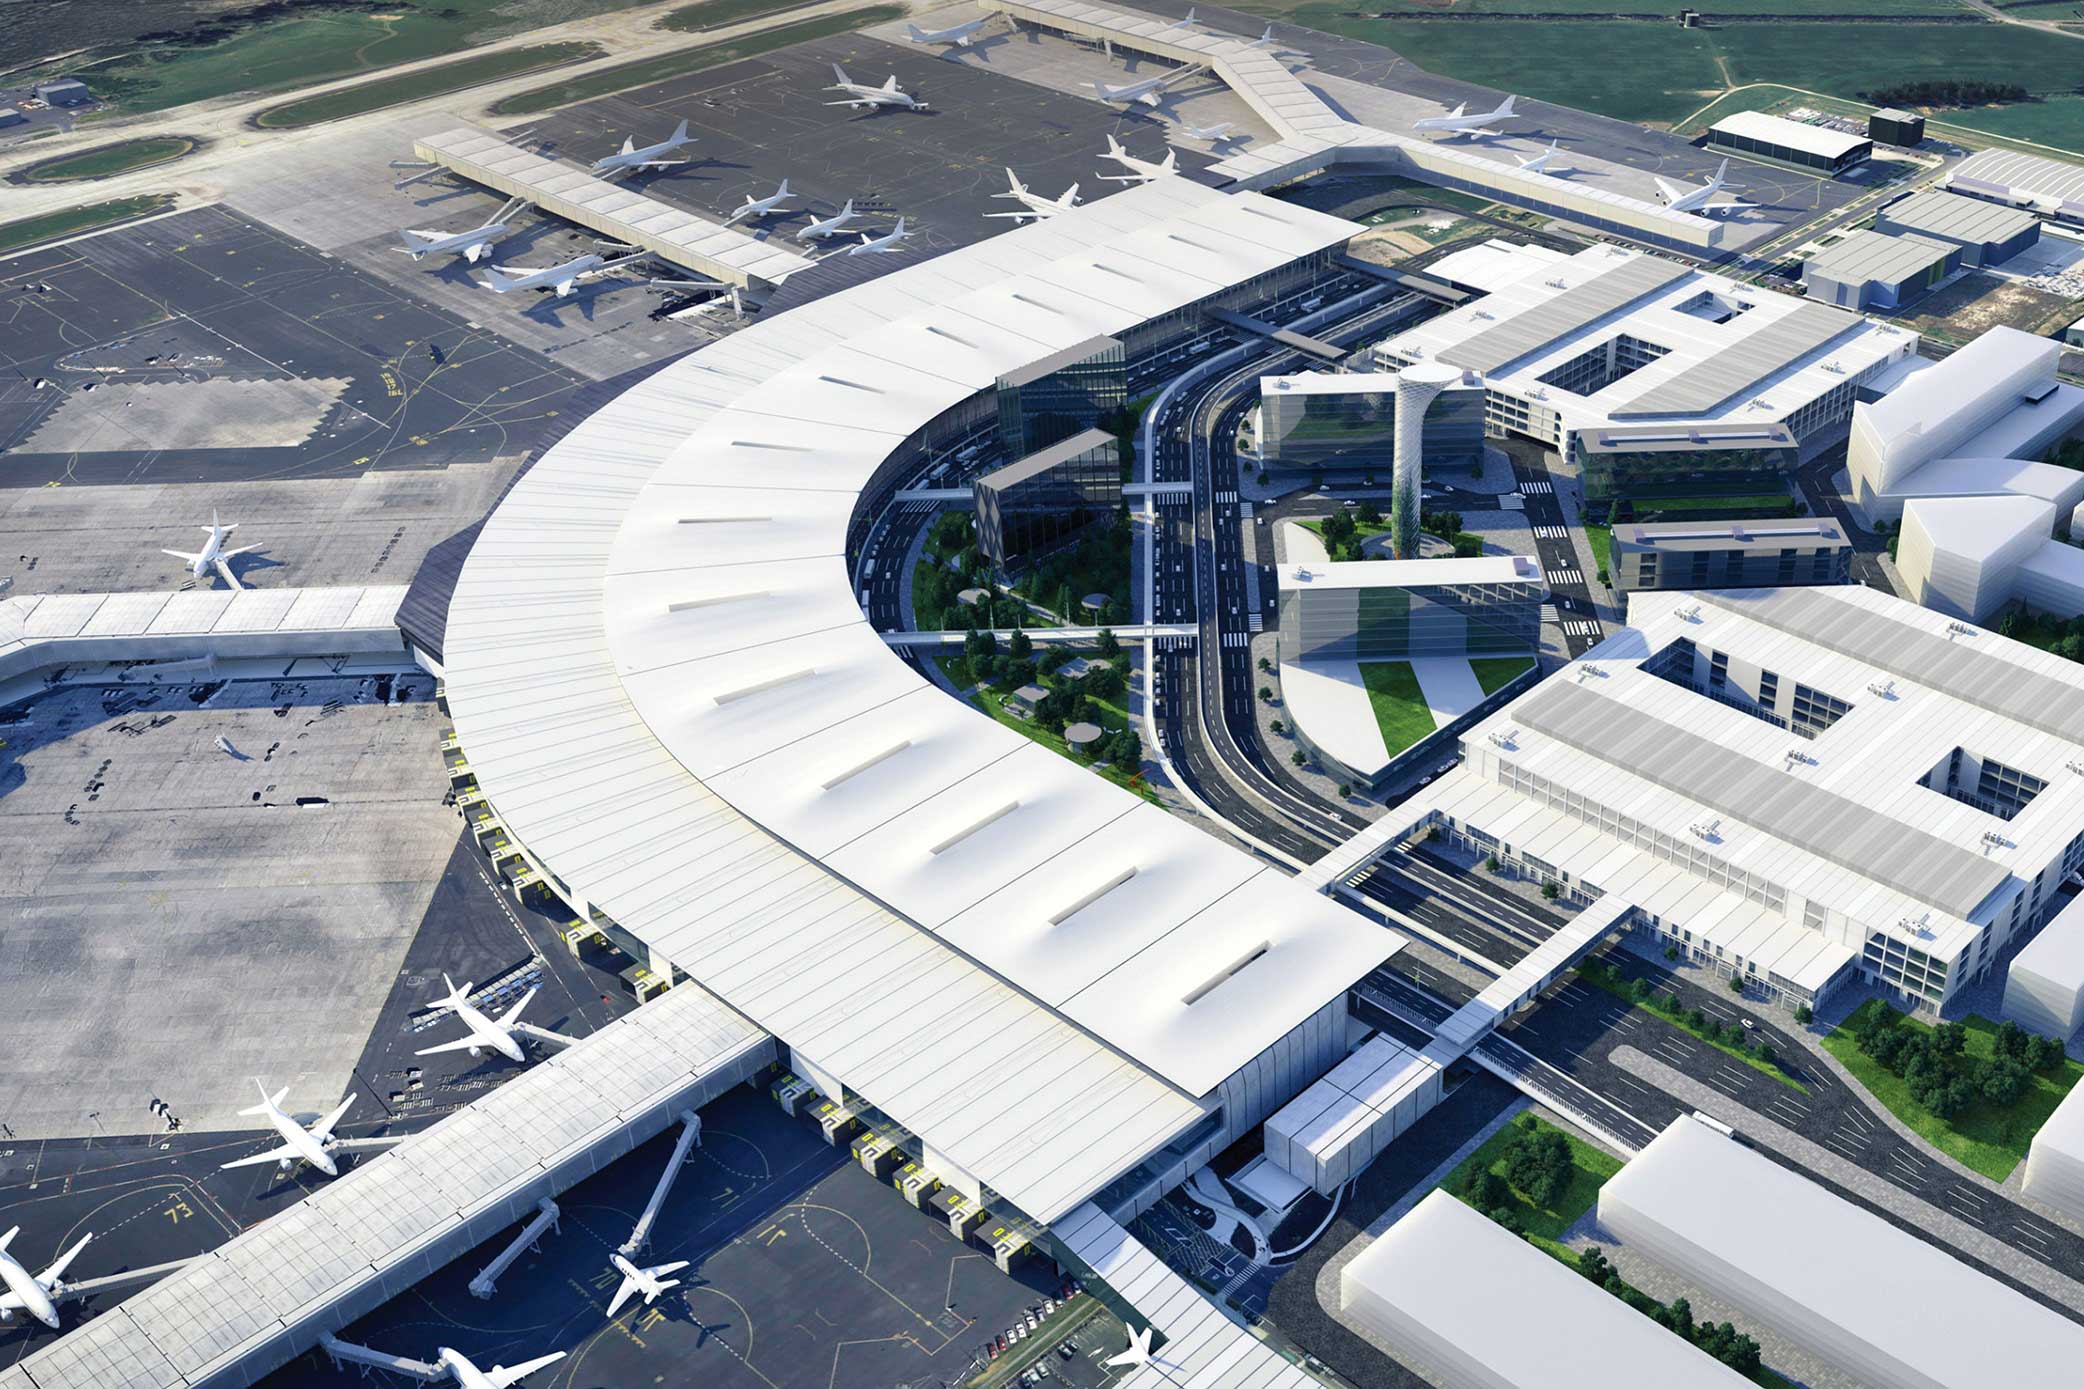 Render of what Auckland Airport may look like in the future